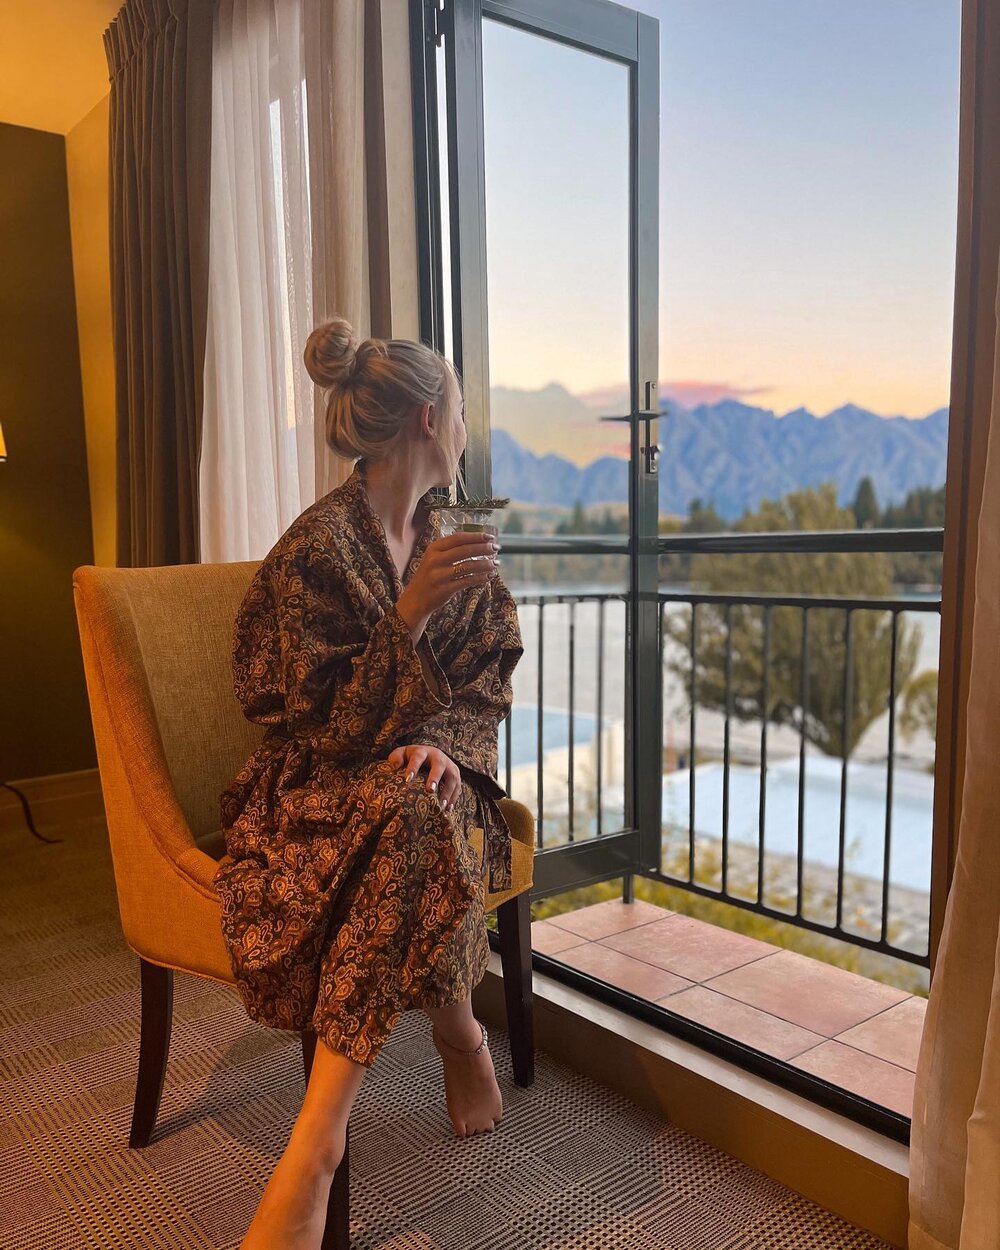 Ad/ My ideal night..

Sitting in a stunning hotel room such as the @hotelstmoritz drink in hand, comfy robe, watching the sunset followed by a warm bath and room service.

Anyone else feeling me right now? Want to join?